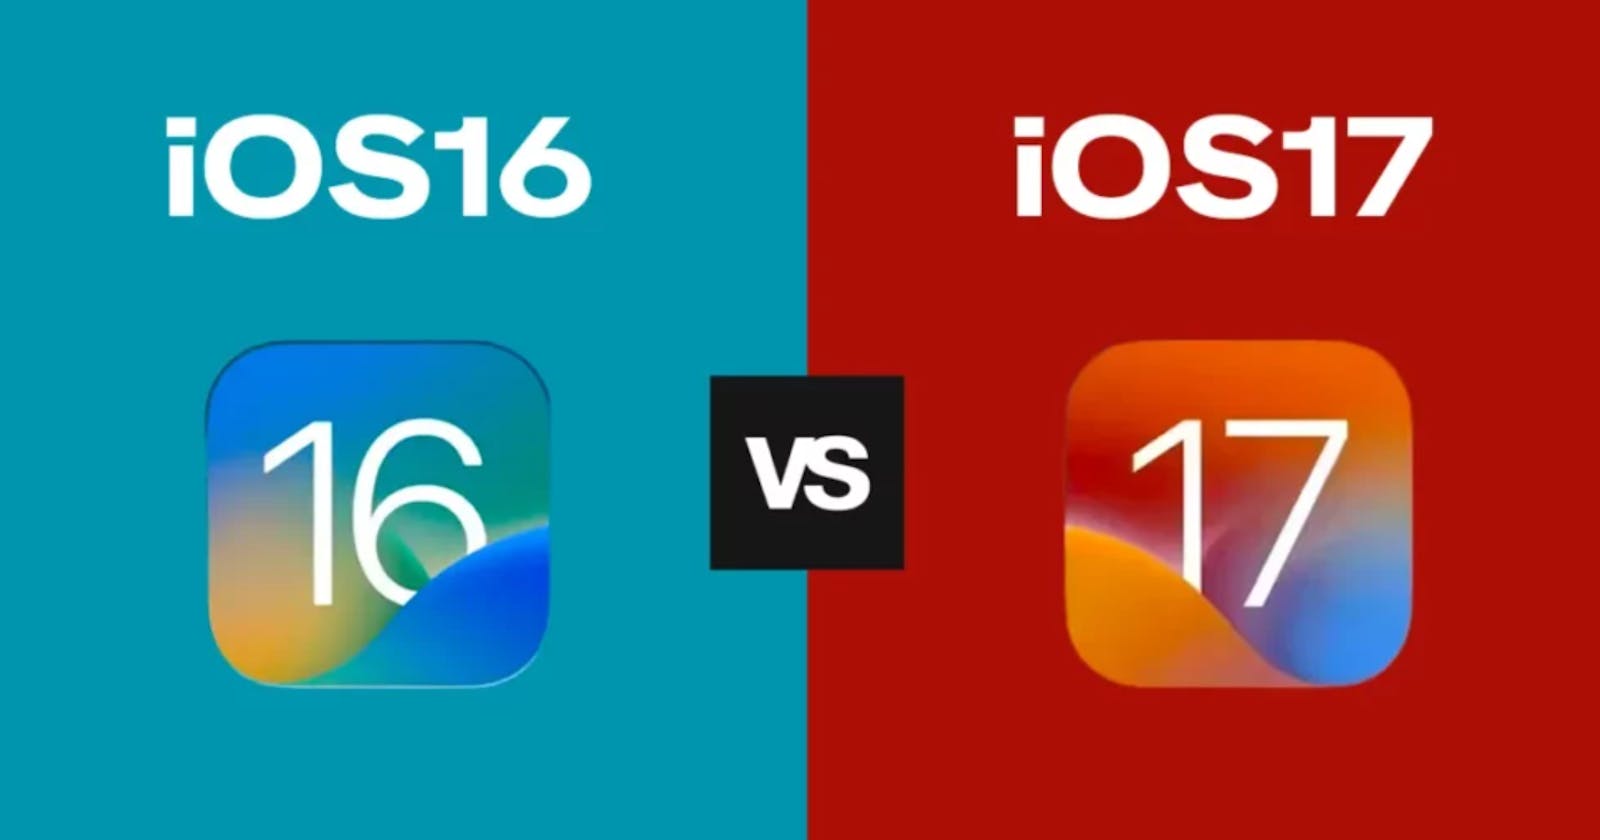 How iOS 17 is more powerful than iOS 16